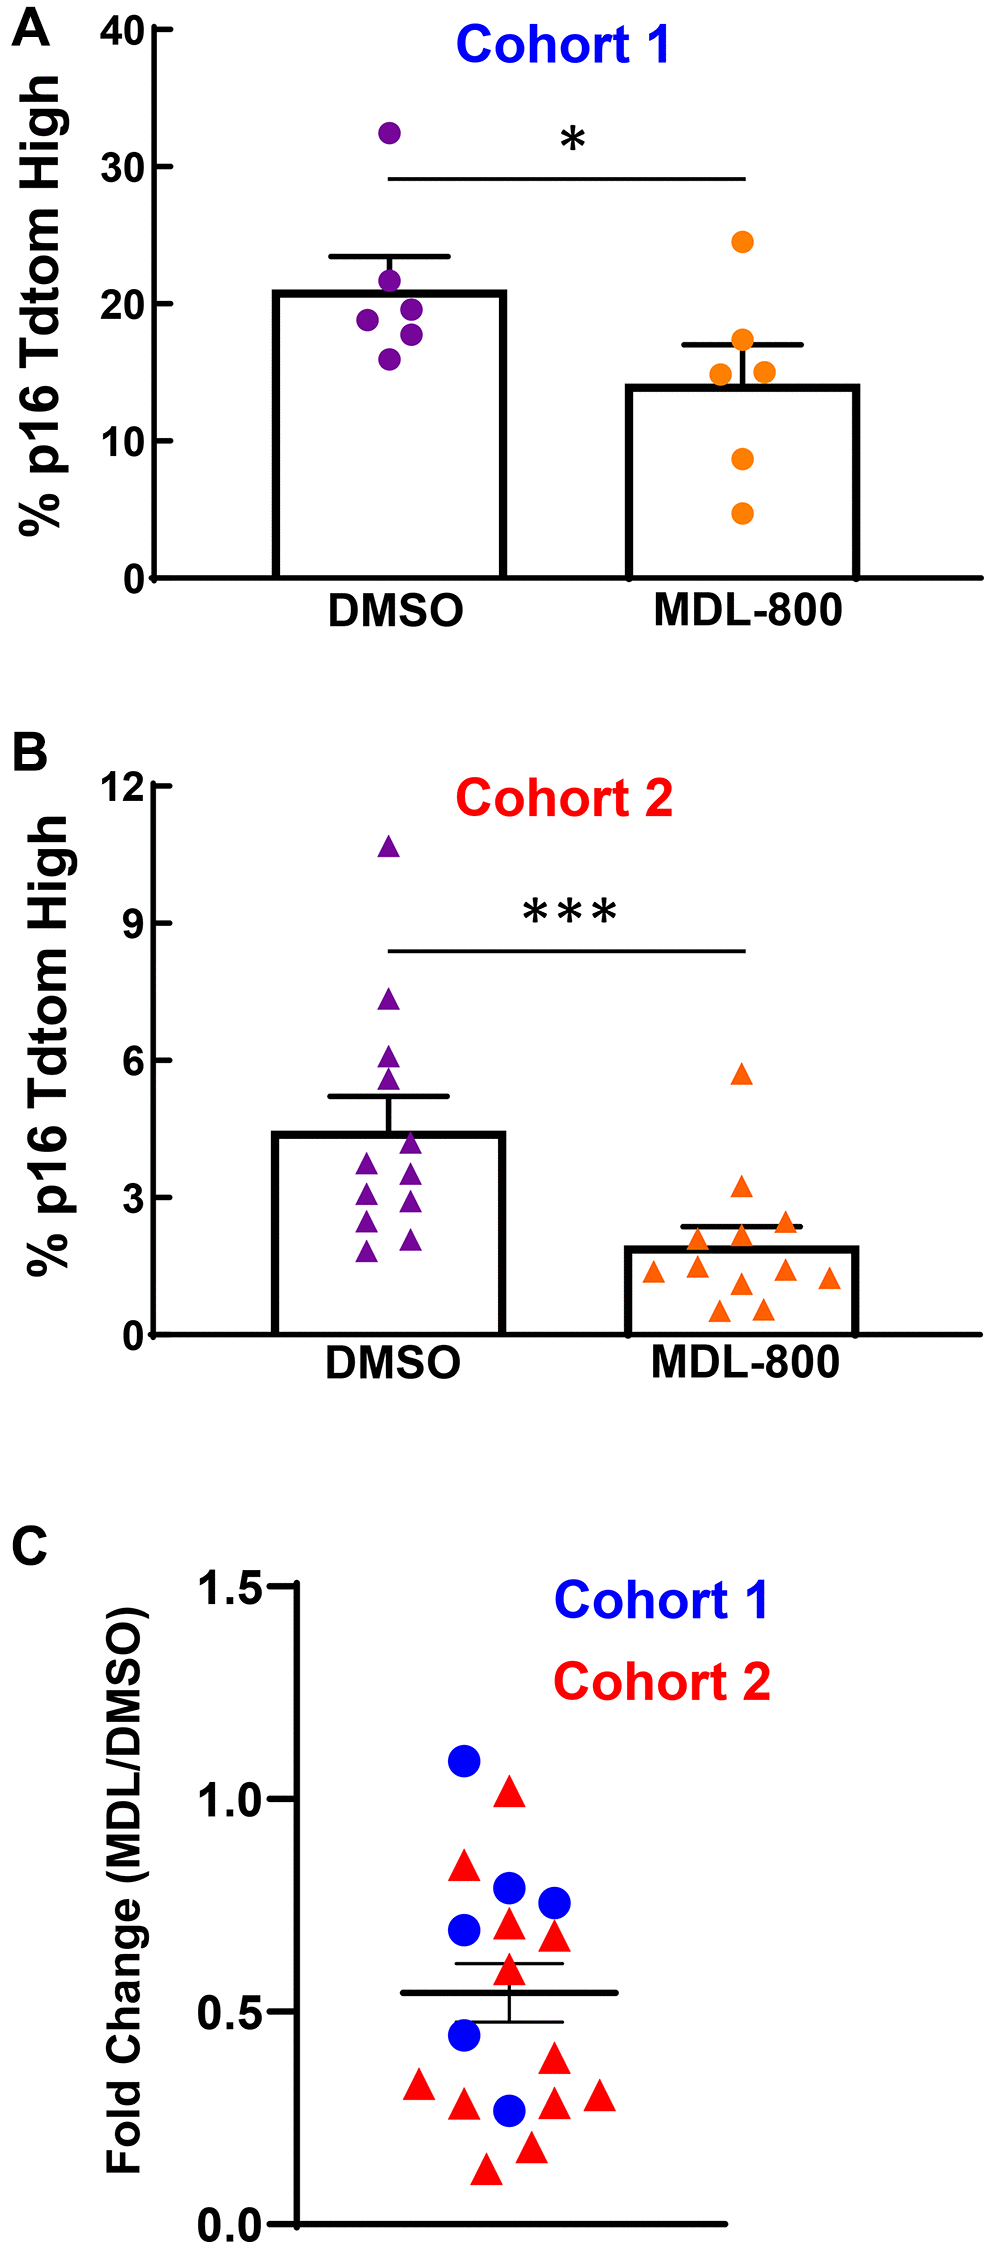 SIRT6 activation limits senescence burden in murine cartilage explants. (A) Femoral cap cartilage was obtained from each hindlimb of 3-week-old p16tdTom mice and cultured for three weeks under senescence inducing conditions with either 20 μM MDL-800 or DMSO control. Analysis of the percentage of cells positive for tdTomato performed by flow cytometry. Data from Cohort 1 were normally distributed by Shapiro-Wilk and thus paired t-test was applied. (B) Same as panel A but a different cohort of mice. Data from cohort 2 were not normally distributed by Shapiro-Wilk and thus Wilcoxon matched-pairs signed rank test was applied. (C) For each mouse (blue circles: cohort 1; red triangles: cohort 2), the percentage of tdTomato-positive cells in the MDL explant was normalized to the DMSO explant. Asterisks denote statistical significance, with *p ***p = 0.001.